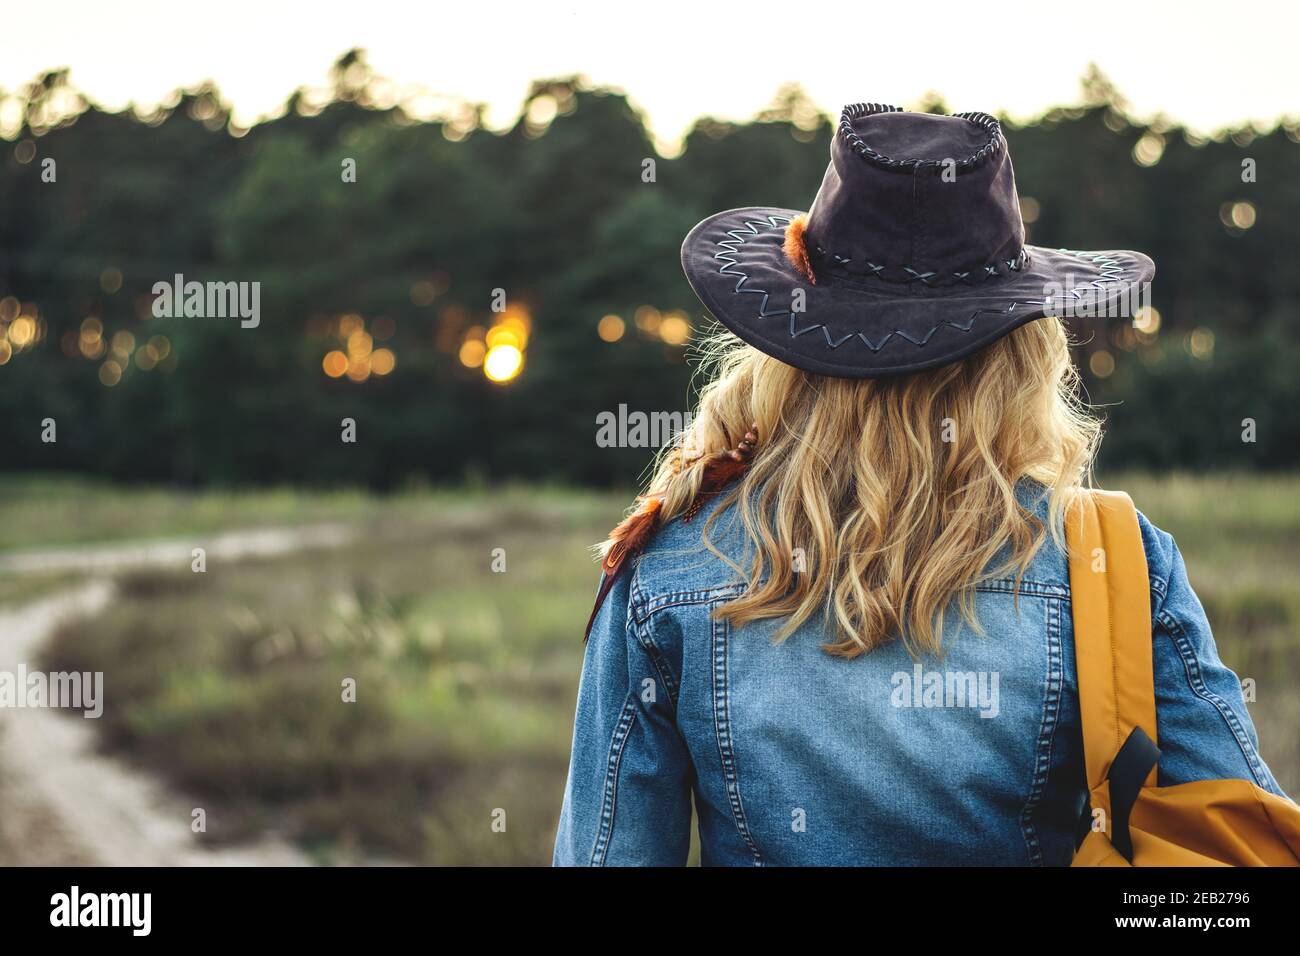 Woman tourist with hat and backpack hiking on footpath in nature during sunset. Rear view of blond hair female tourist wearing denim jacket is walking Stock Photo